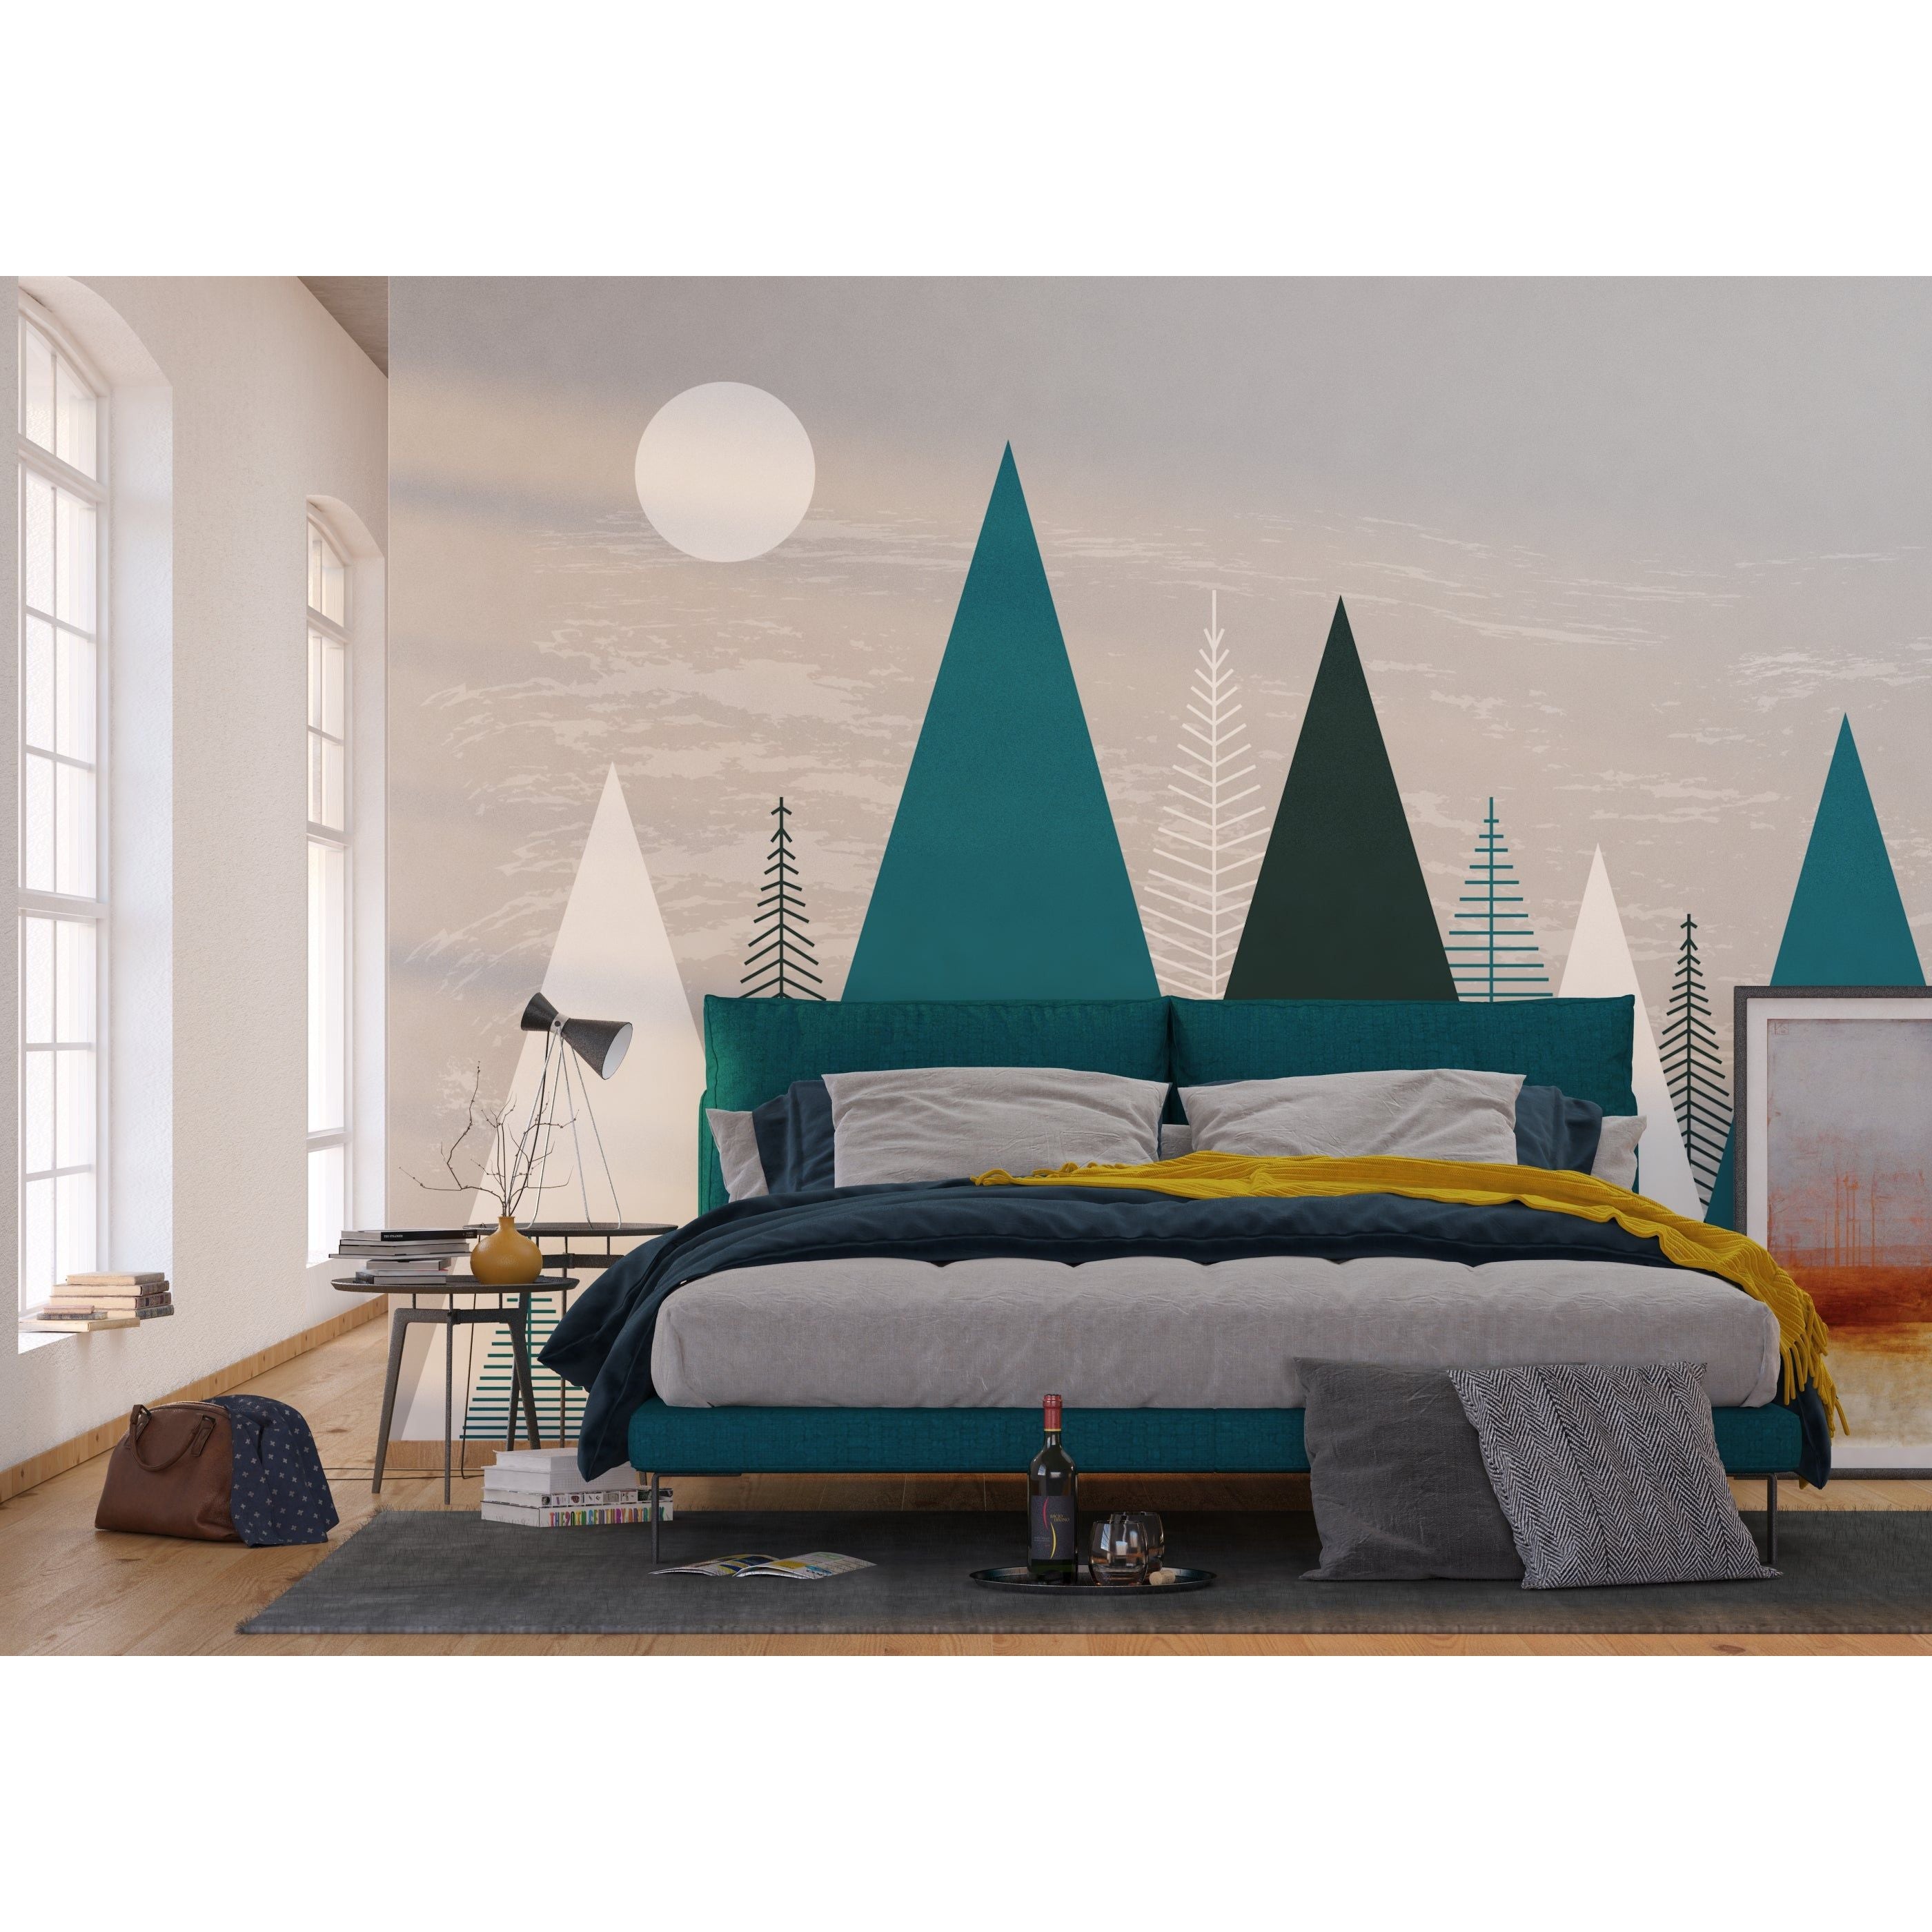 Children's Wall Mural with Trees and Blue Triangles